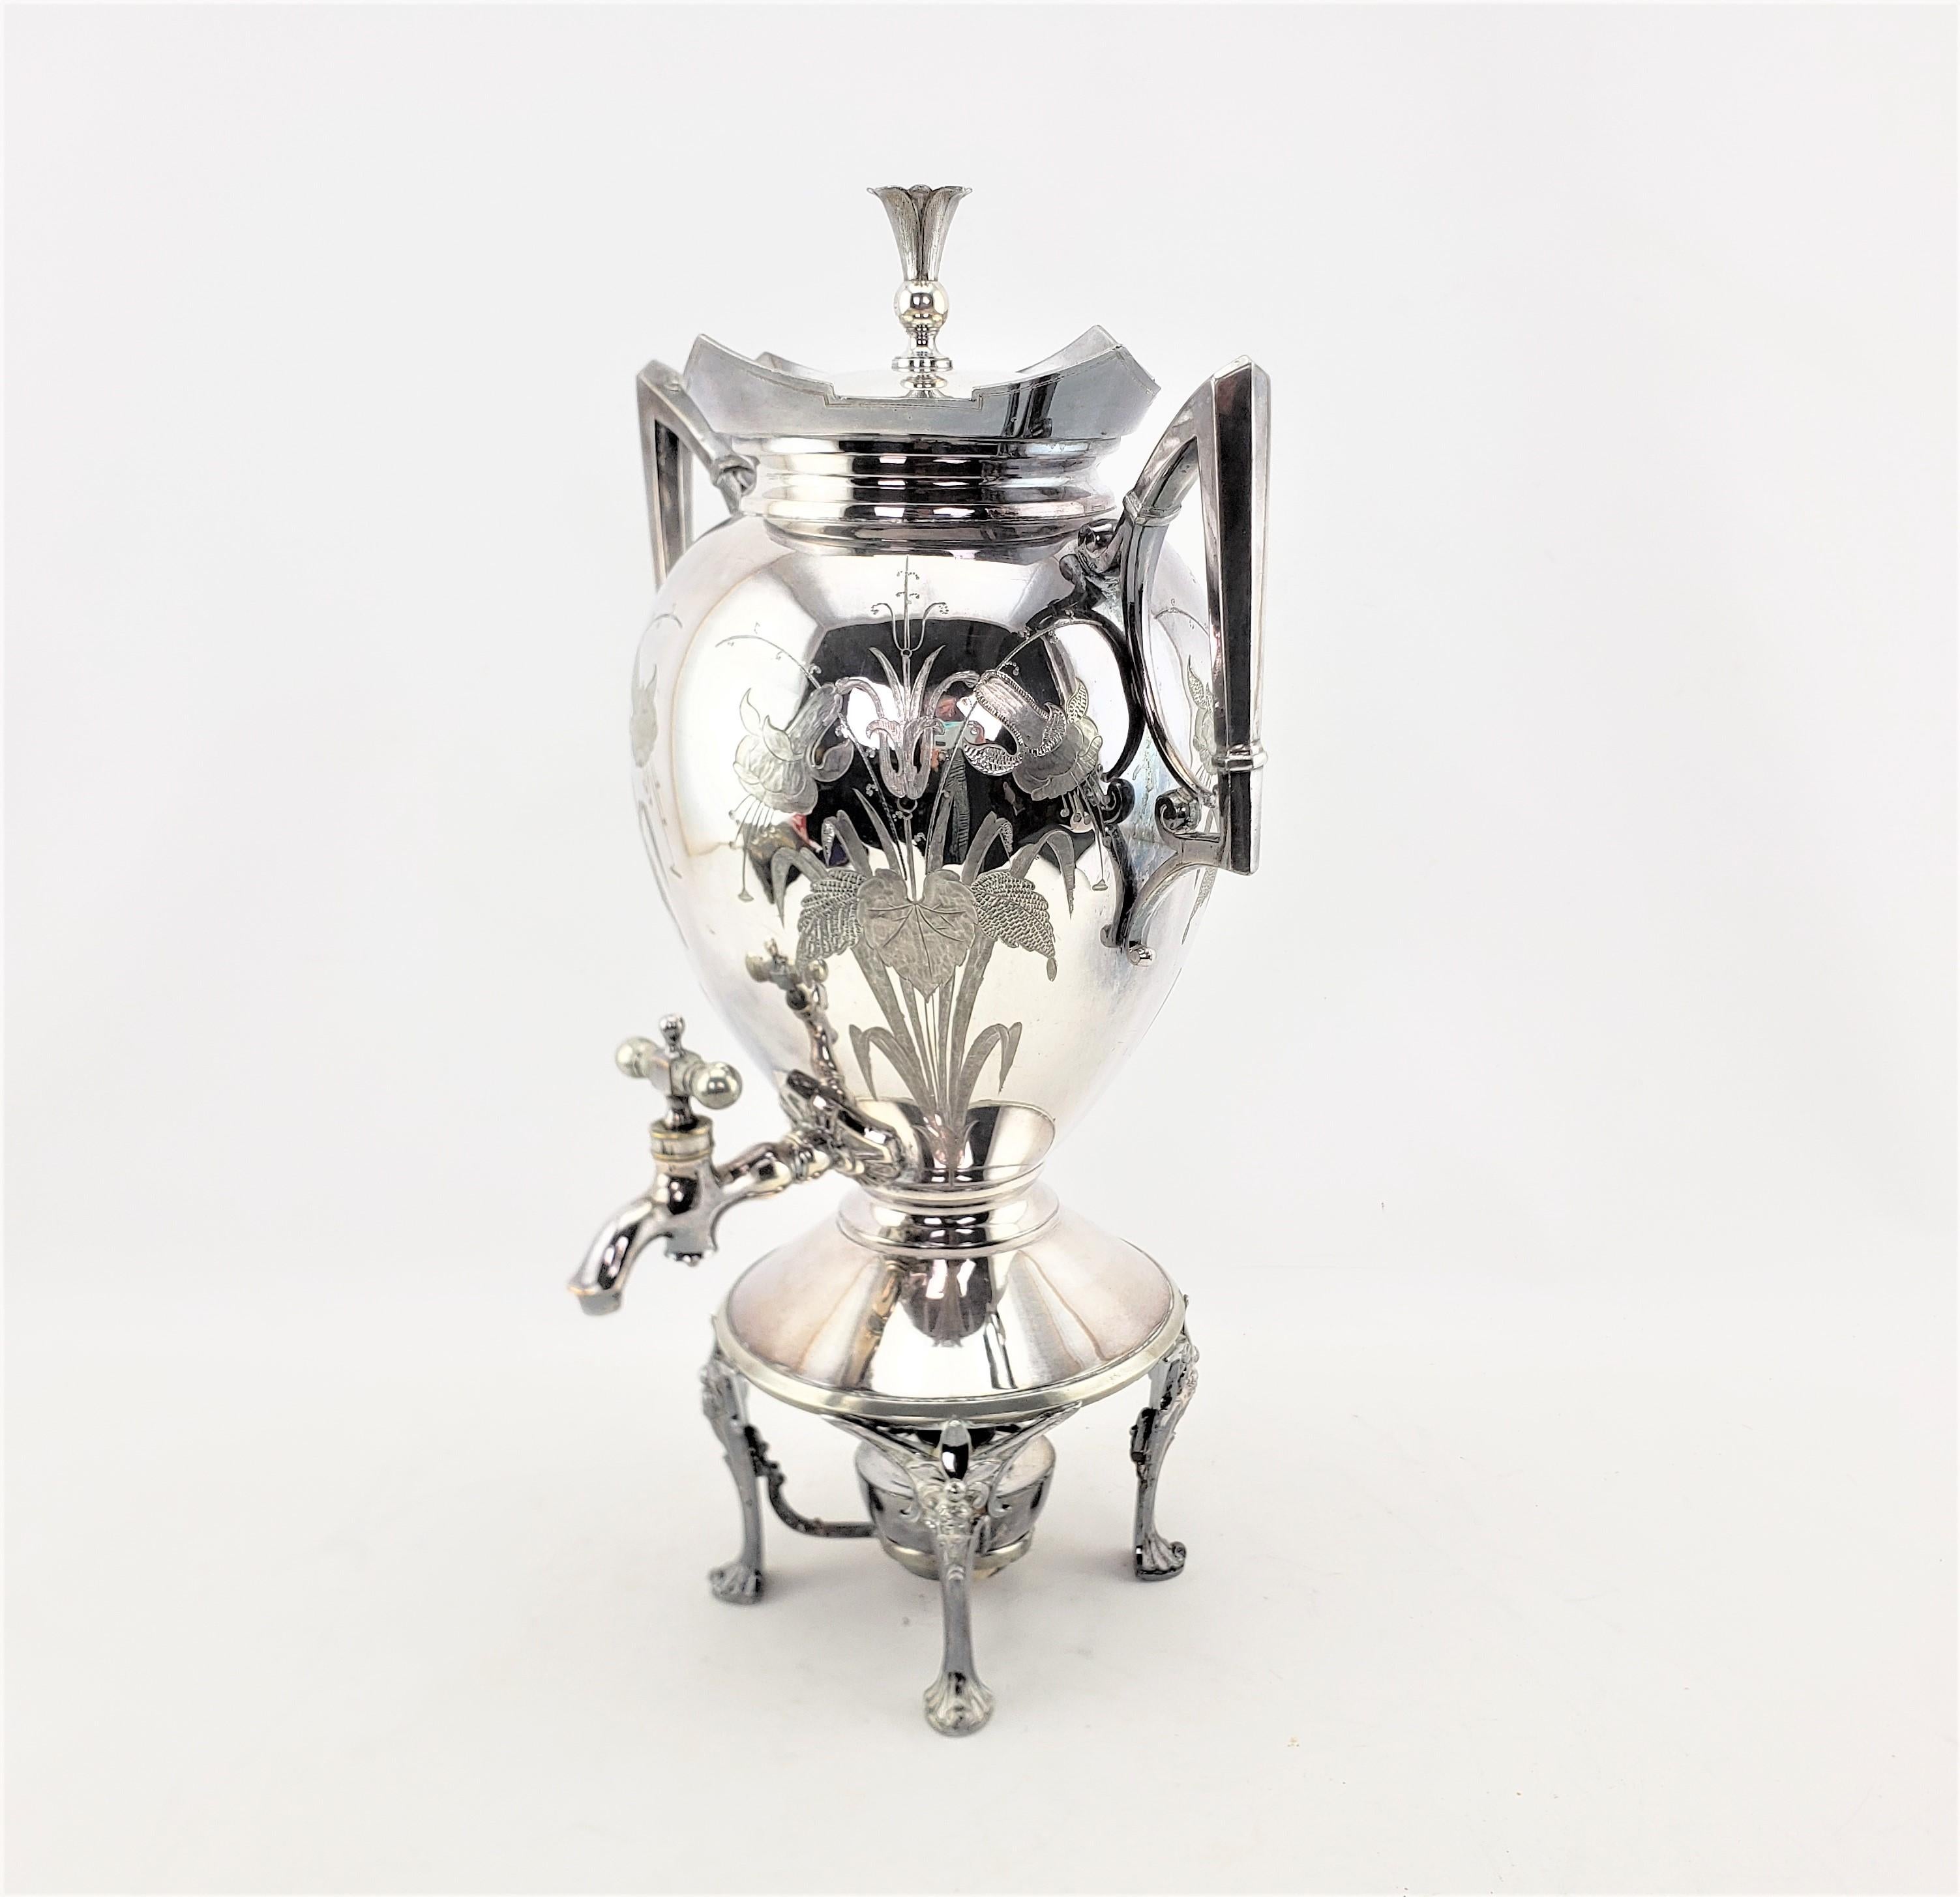 This antique silver plated hot water kettle was made by the Meridian Company of the United States in approximately 1890 in the period Aesthetic Movement style. The kettle has an egg shaped design with towering squared legs and accenting handles with